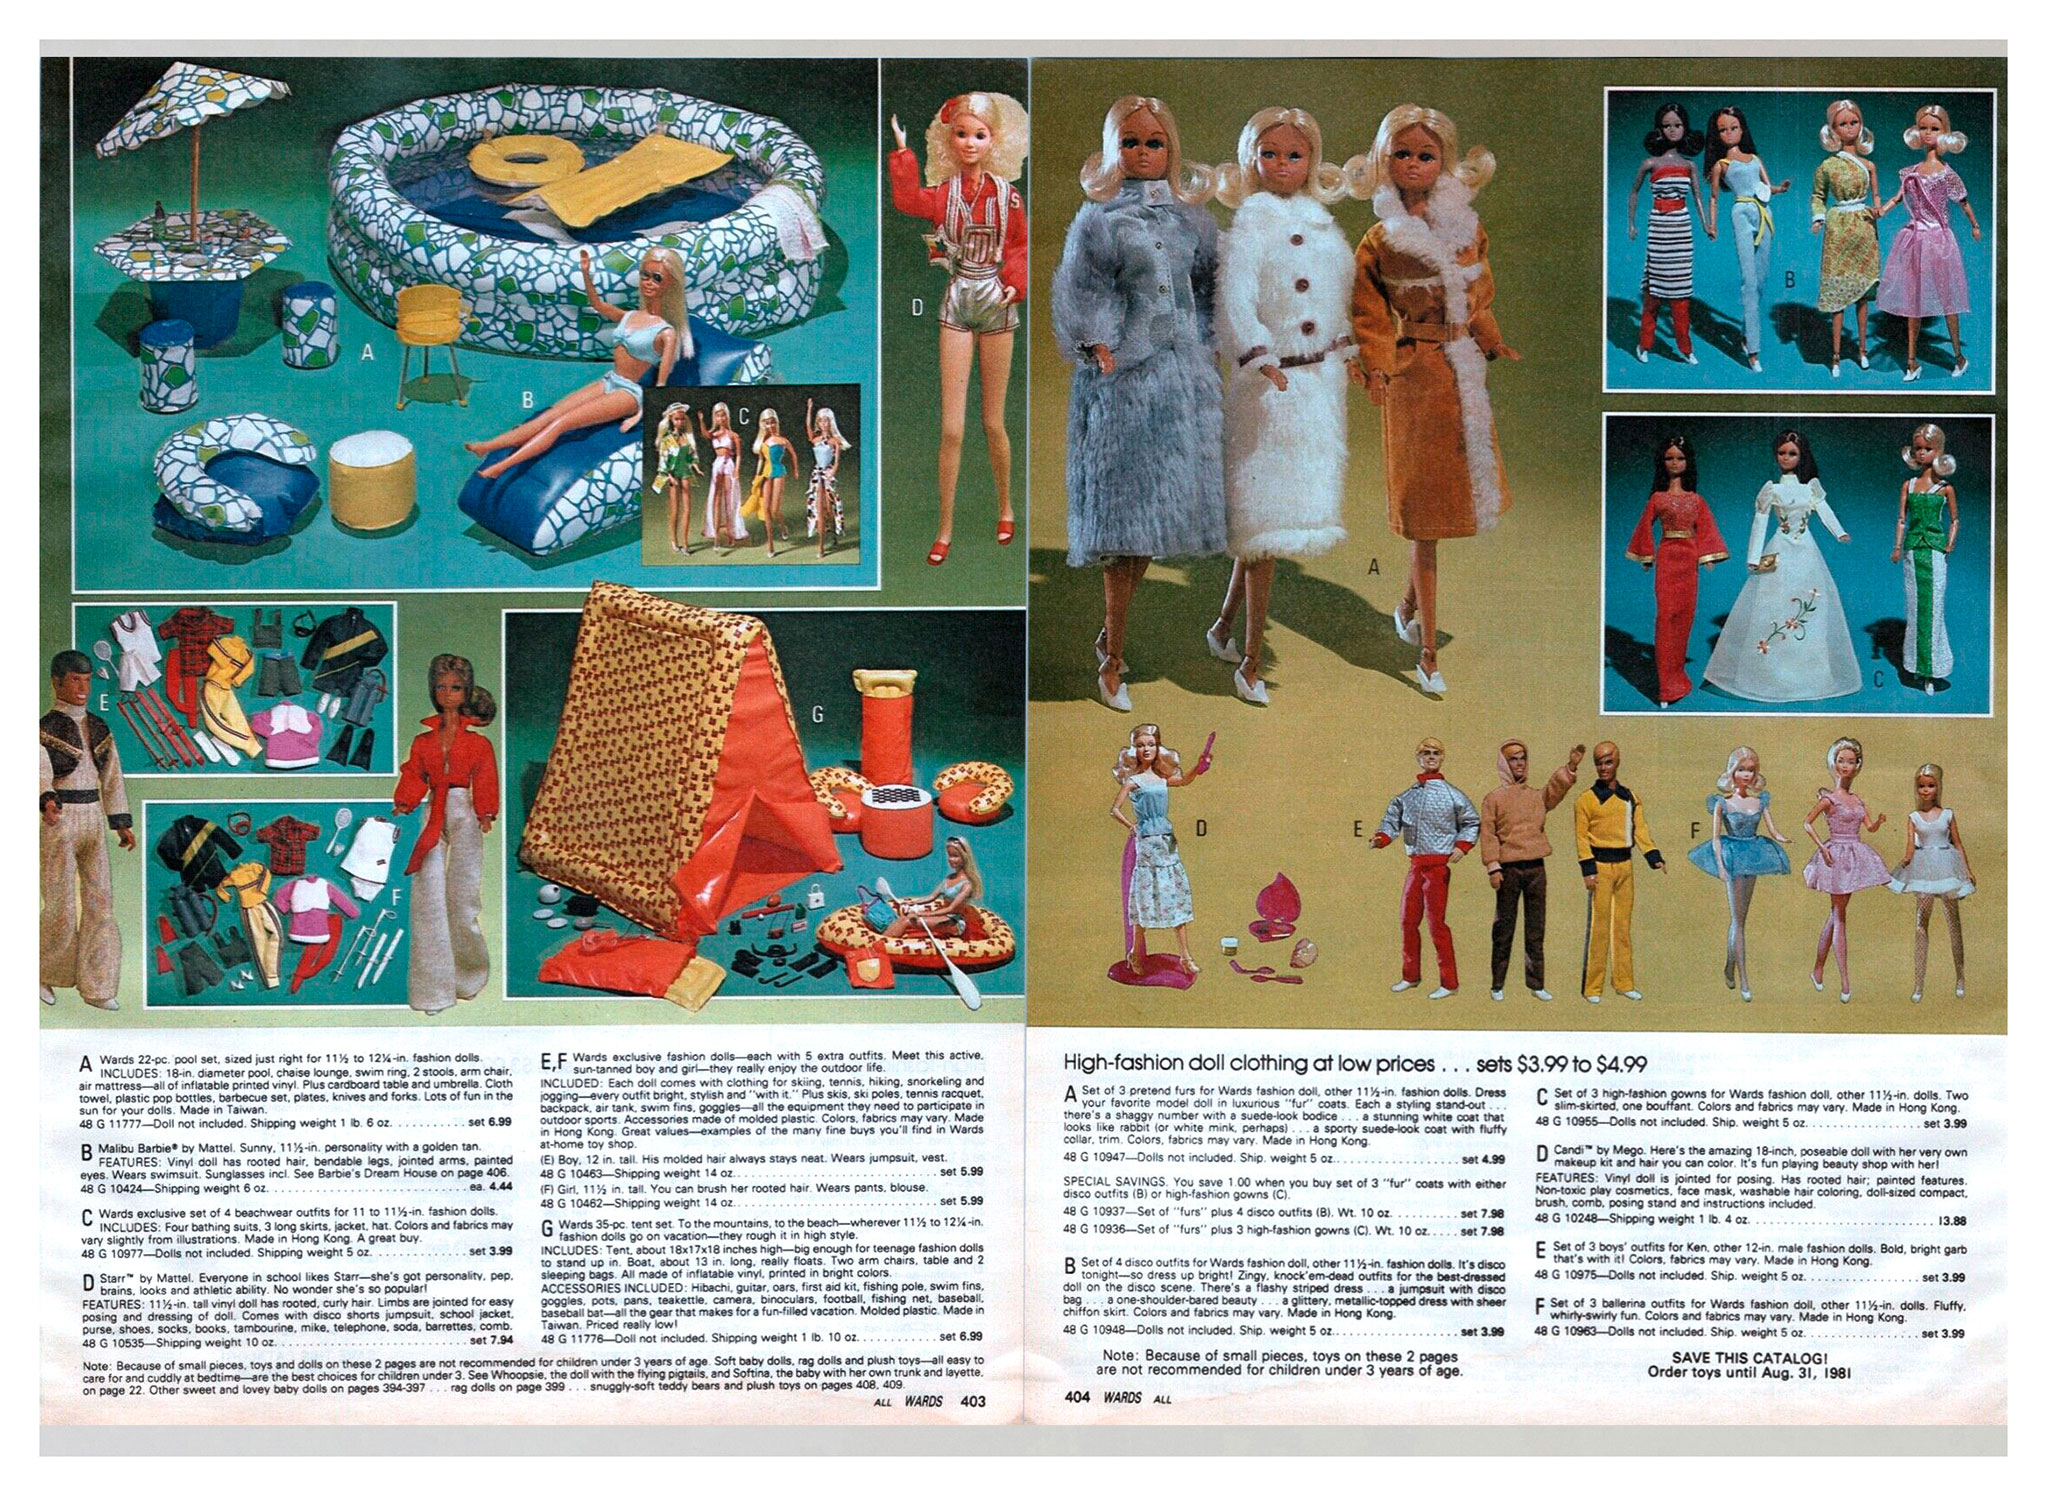 From 1980 Montgomery Ward Christmas catalogue